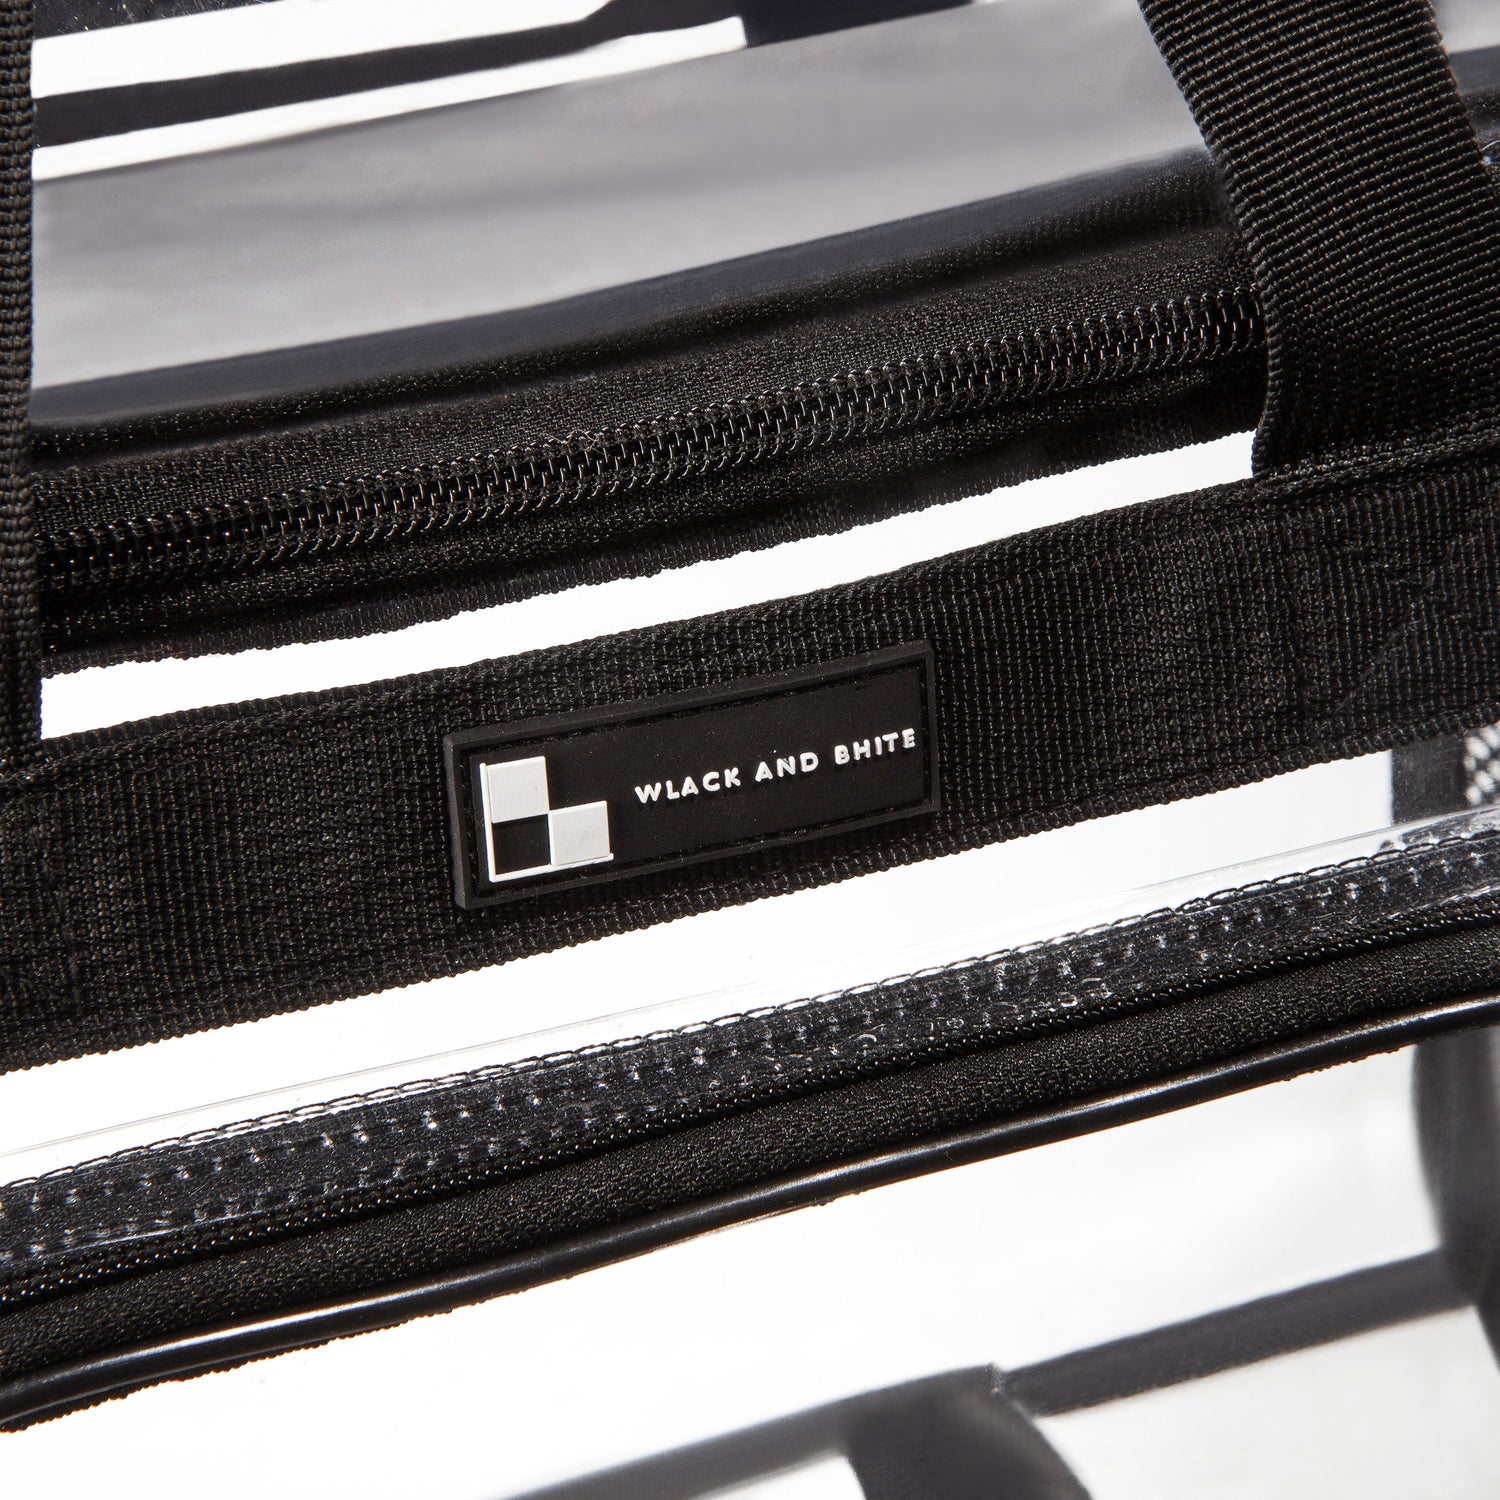 American Heritage | Heavy Duty Clear Lunch Tote